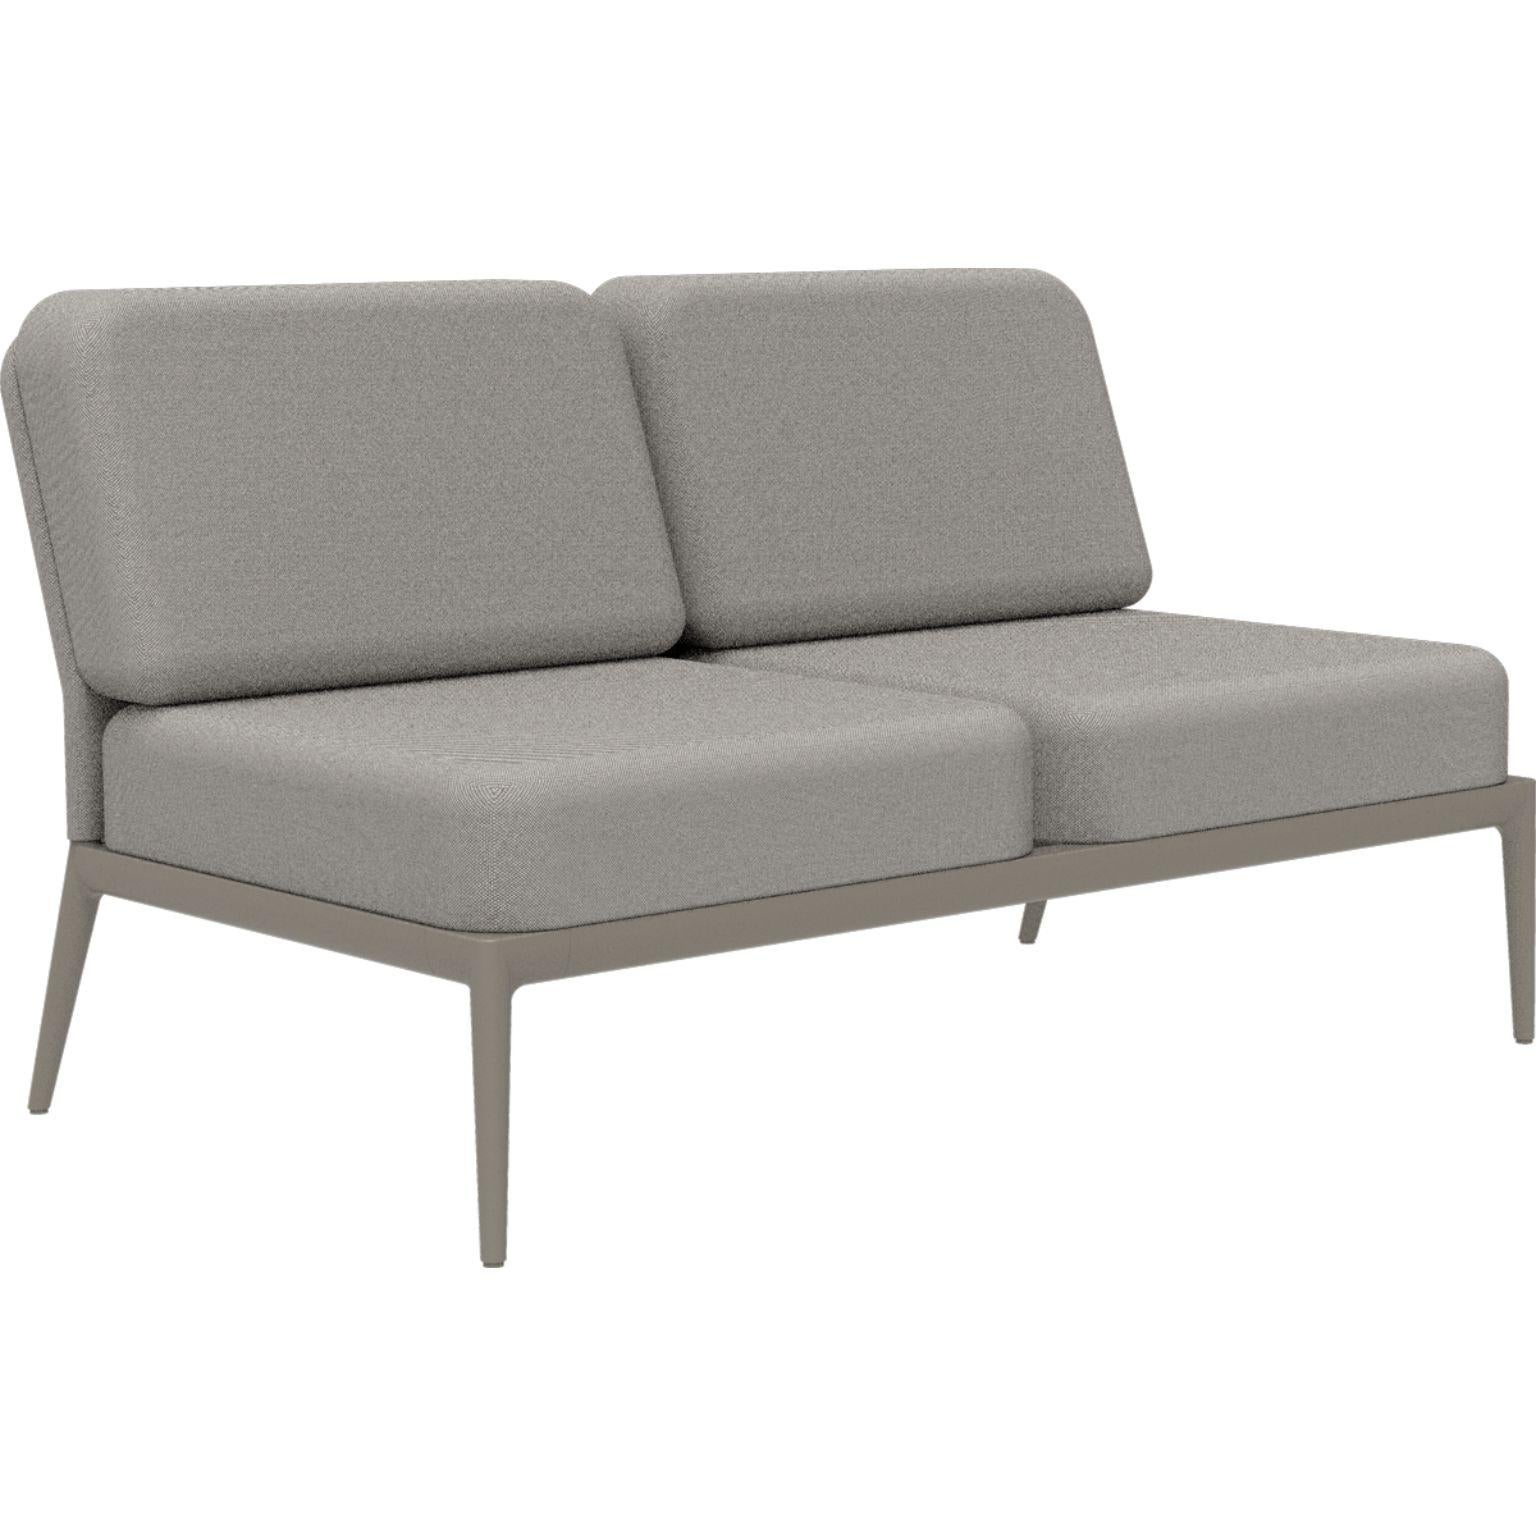 Cover Cream Double Central Modular Sofa by MOWEE.
Dimensions: D83 x W136 x H81 cm (seat height 42 cm).
Material: aluminum and upholstery.
Weight: 27 kg.
Also available in different colors and finishes. 

An unmistakable collection for its beauty and